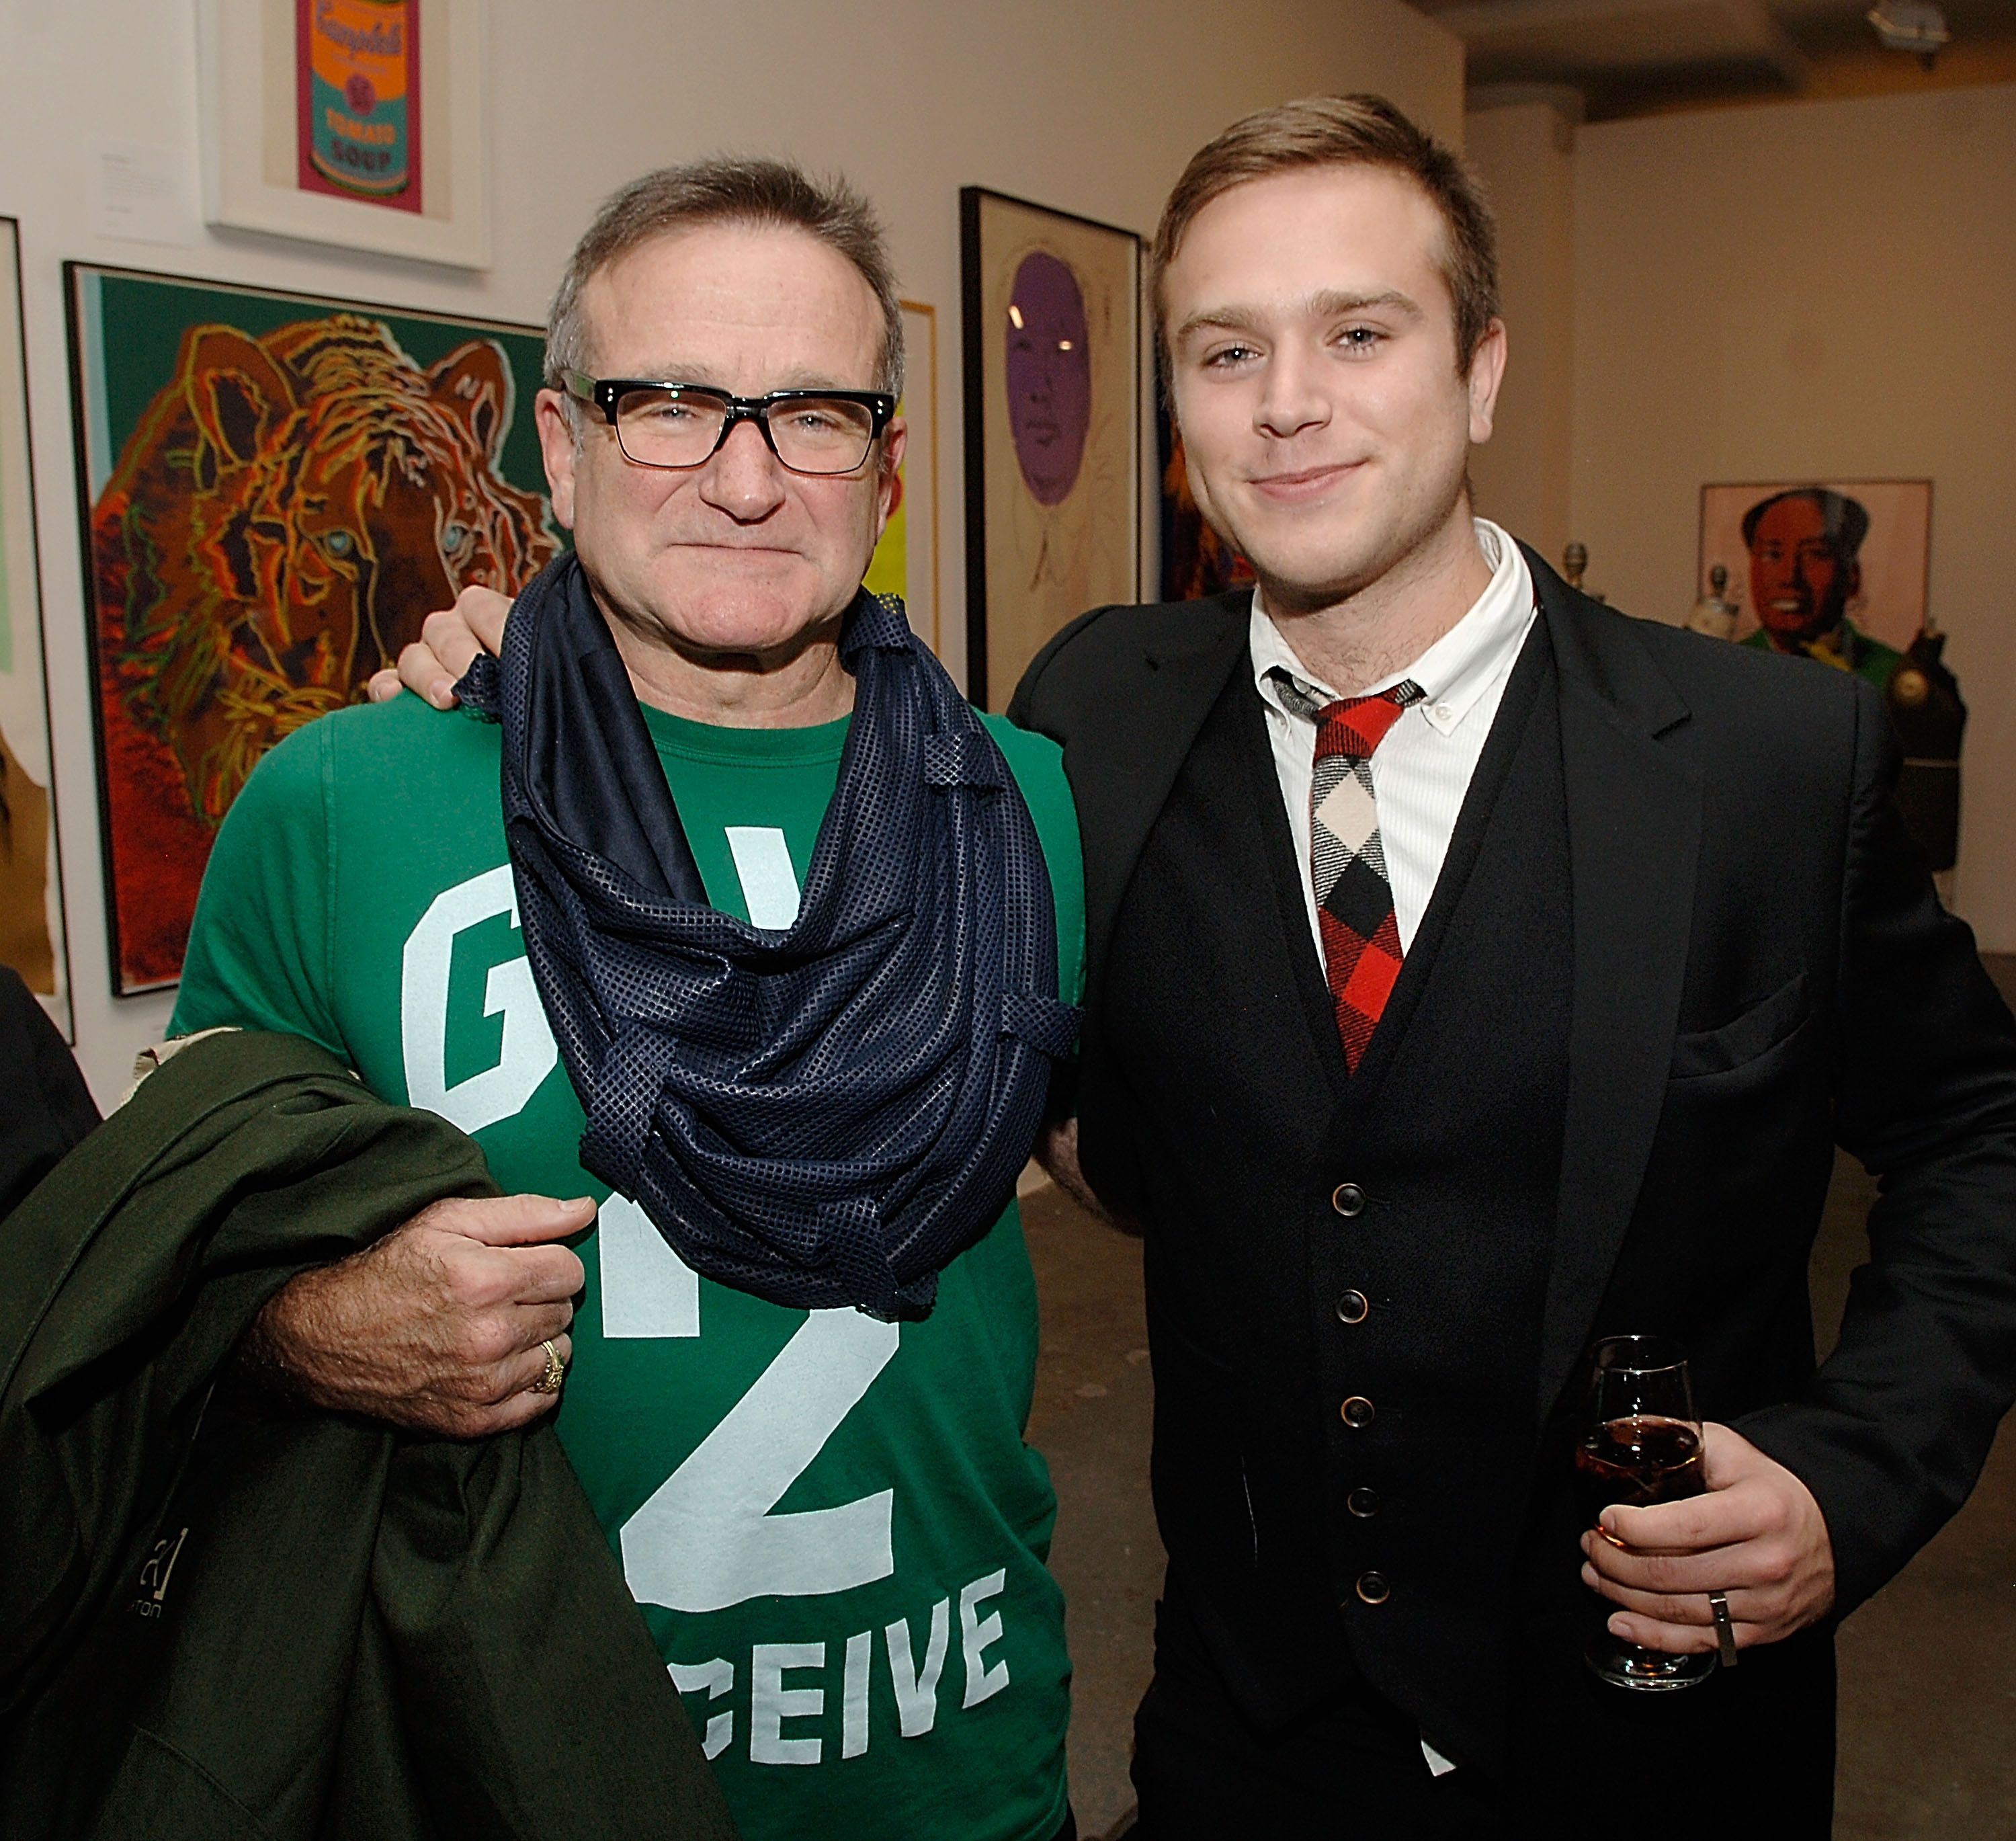 Robin Williams and Zak Williams at the Timo Pre Fall 2009 Launch with Interview Magazine at Phillips De Pury on November 18, 2008 | Photo: Getty Images